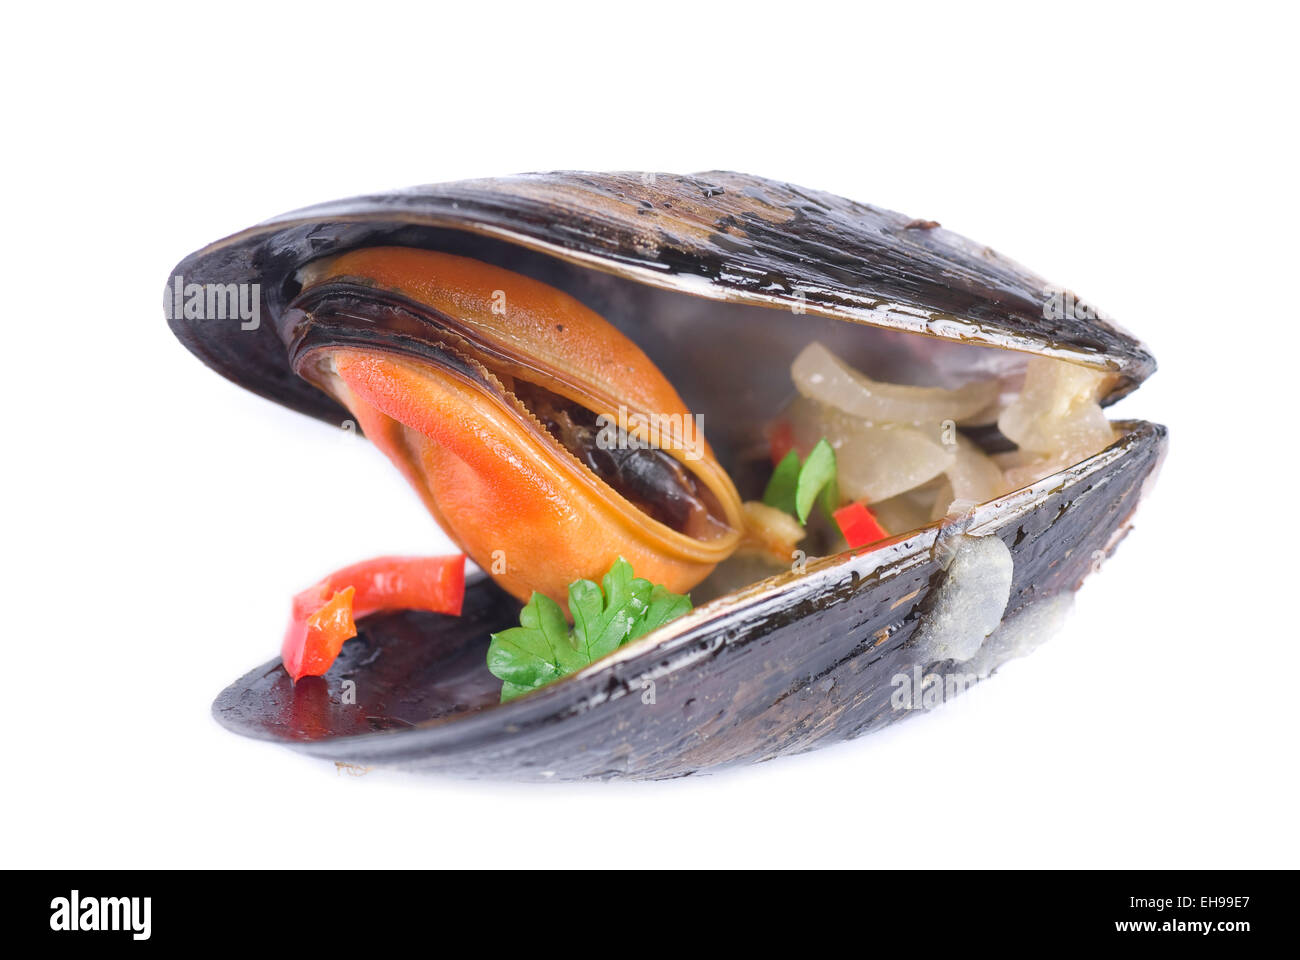 Mussel cooked with chili pepper, onion and parsley. Stock Photo